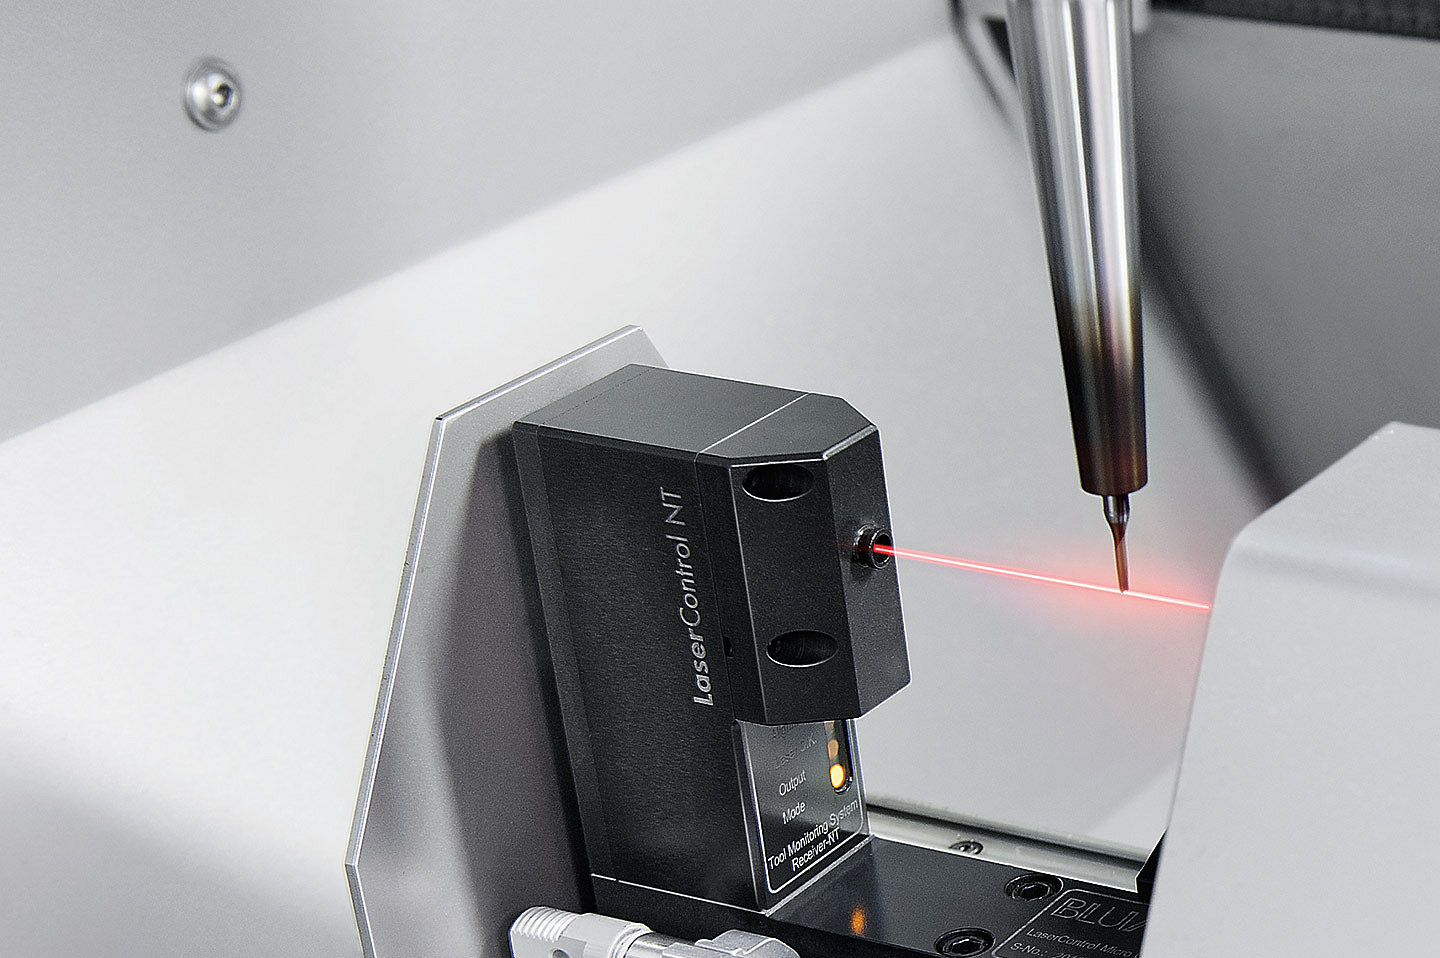 Tool setting, measurement and monitoring with BLUM LaserControl